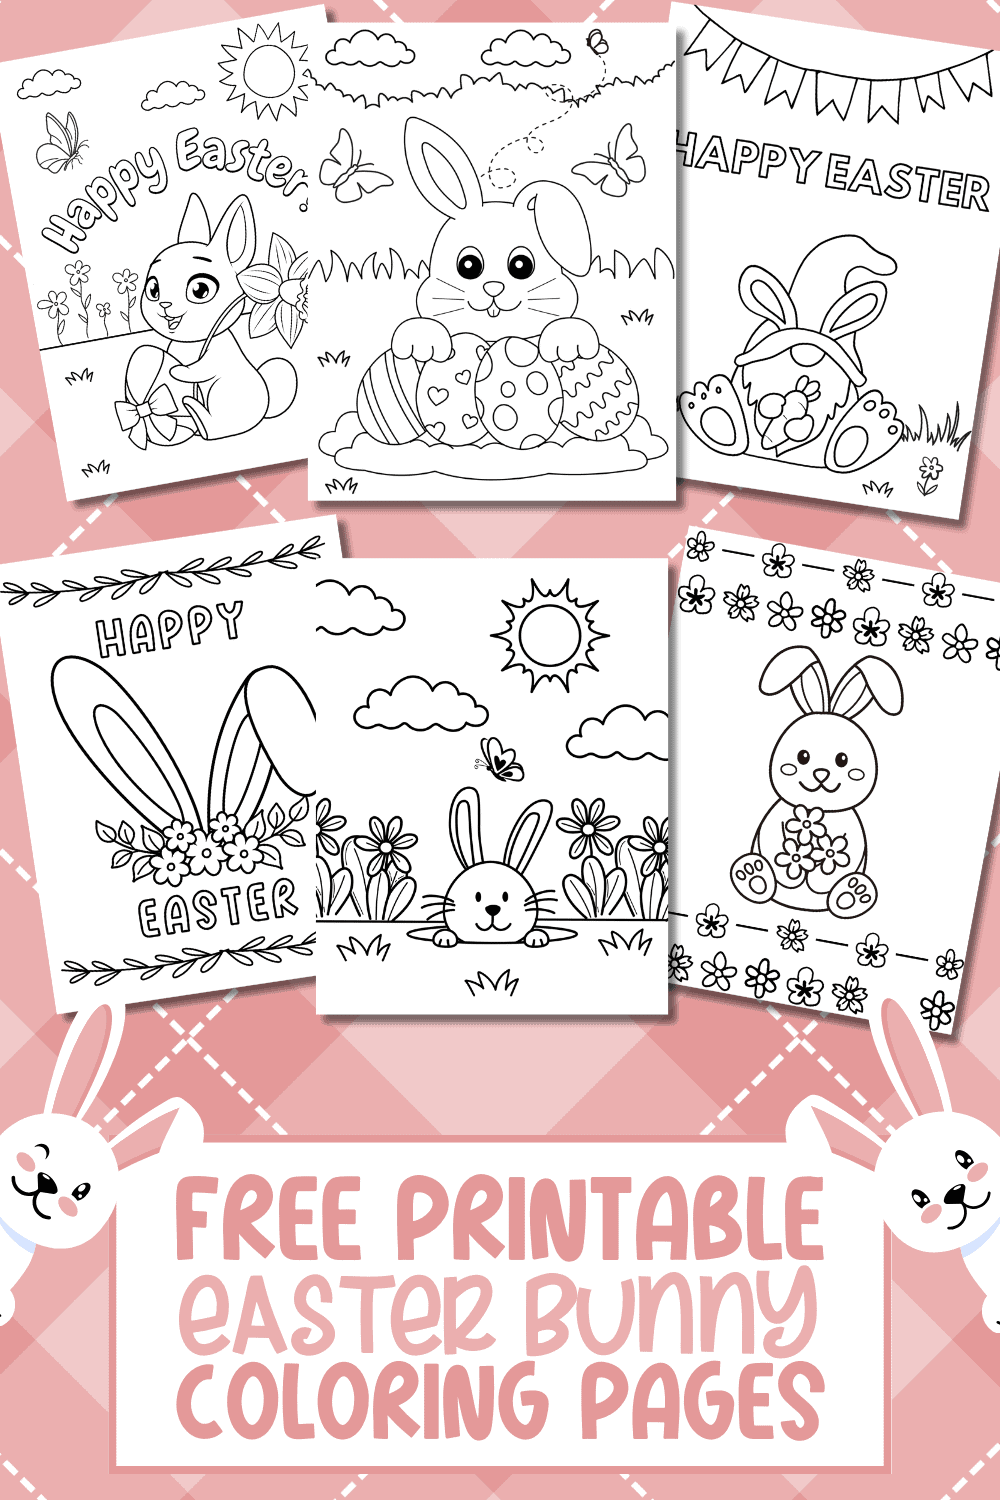 Free Easter Bunny Coloring Pages for Kids